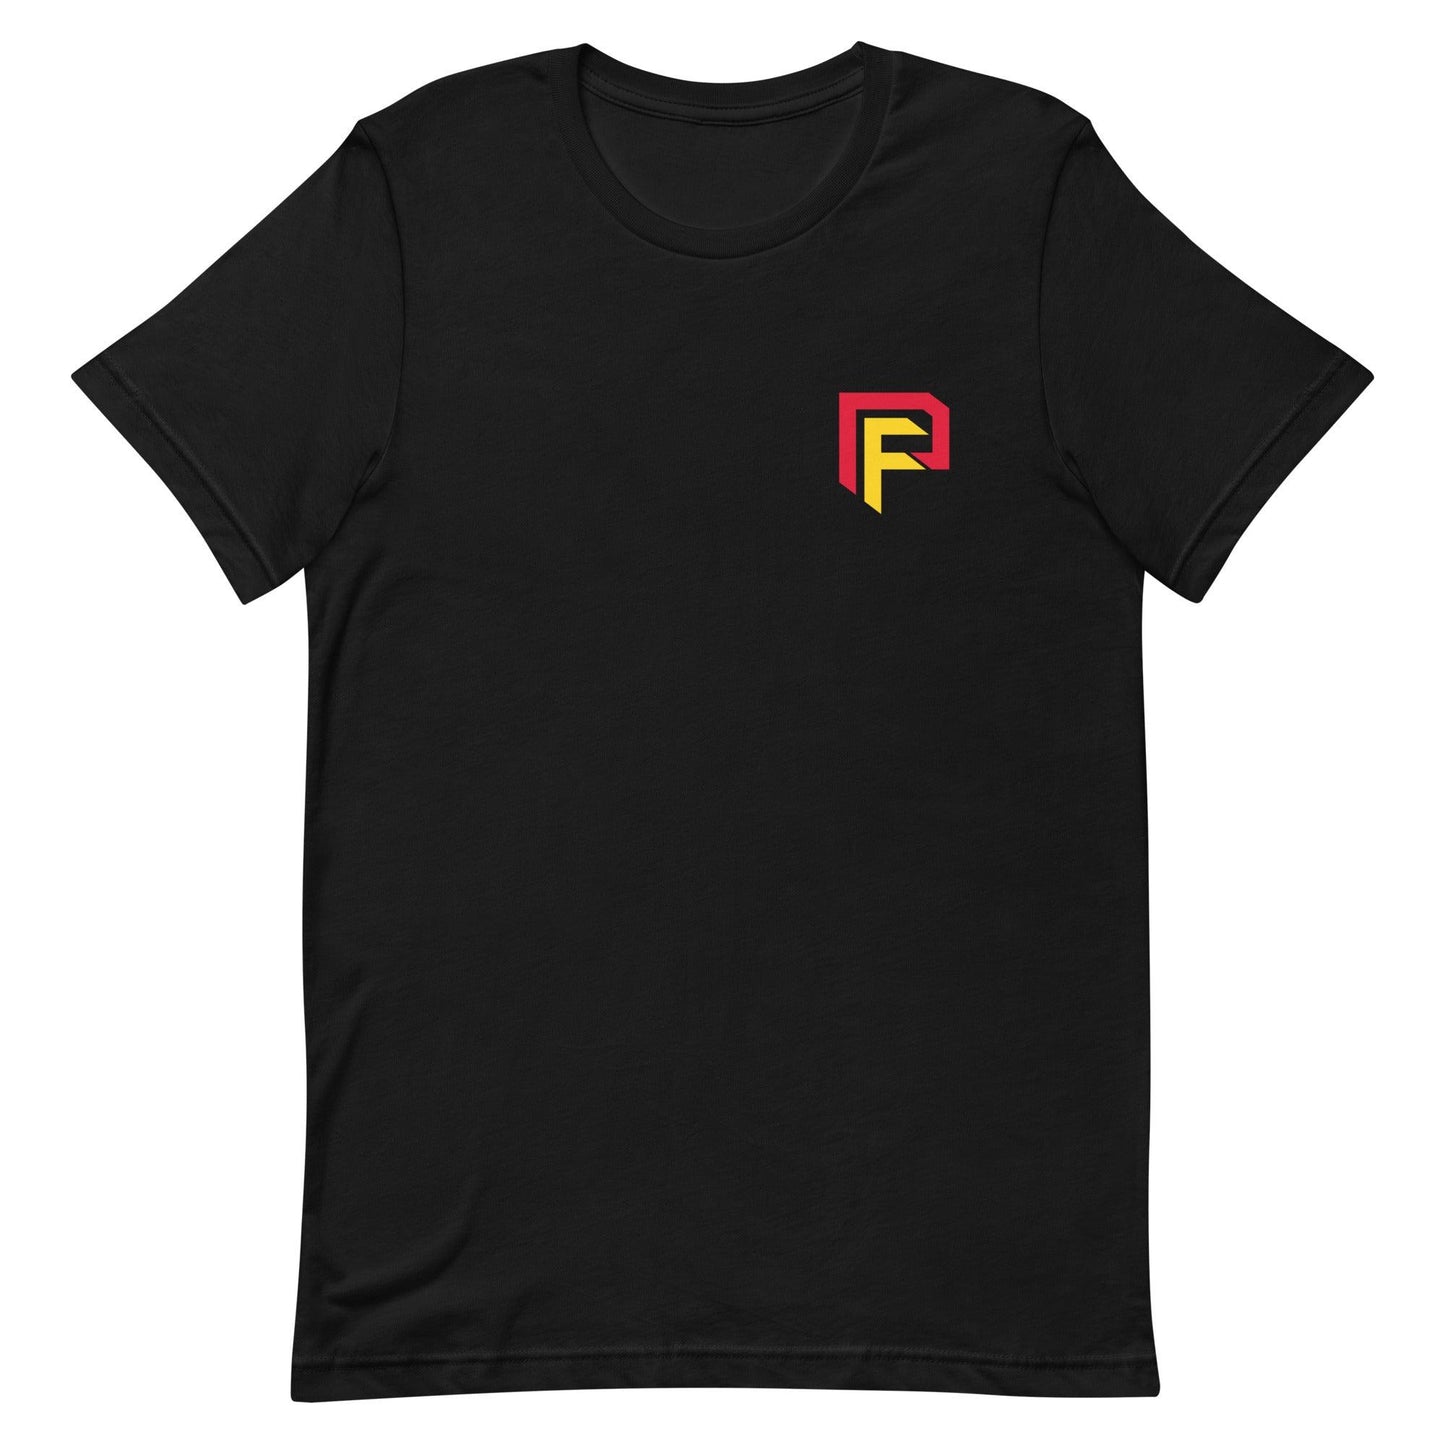 Perry Fisher "Essential" t-shirt - Fan Arch